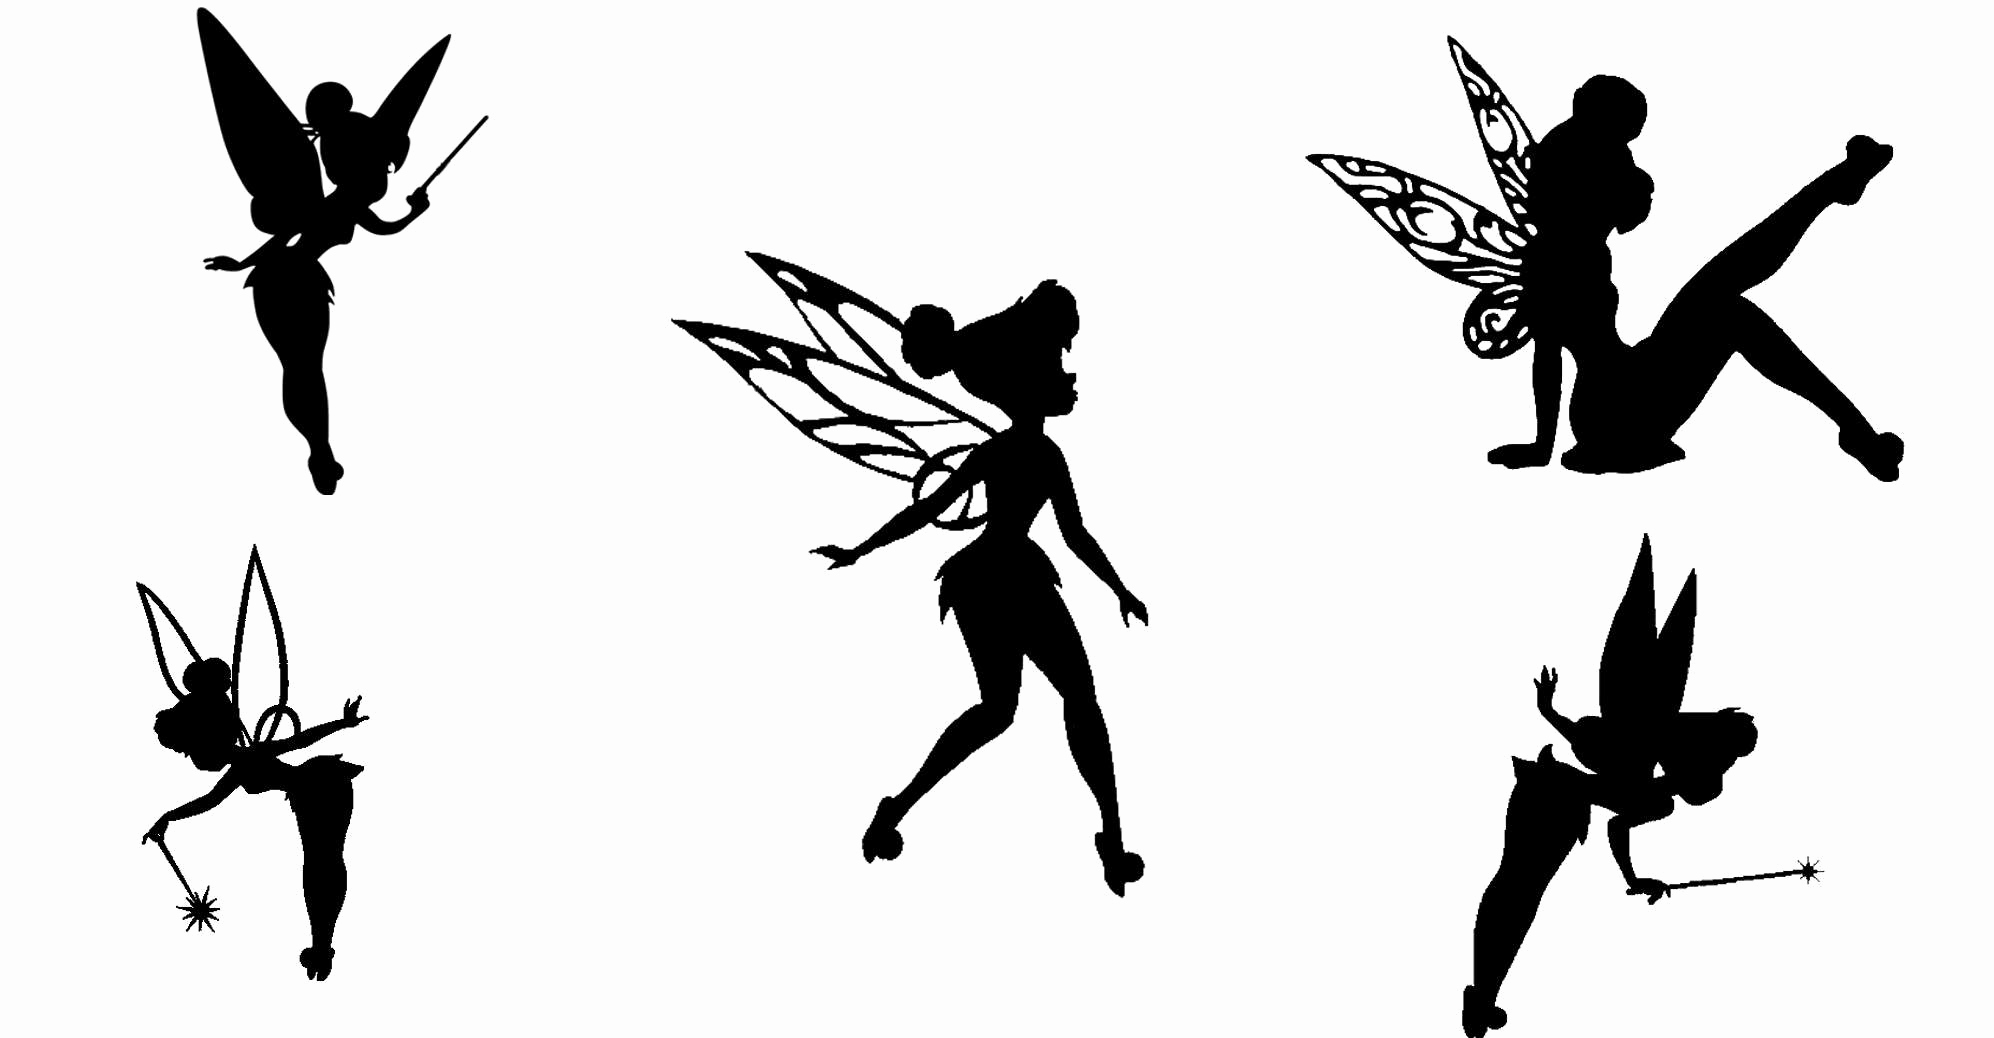 Download Tinkerbell Silhouette Images at GetDrawings | Free download